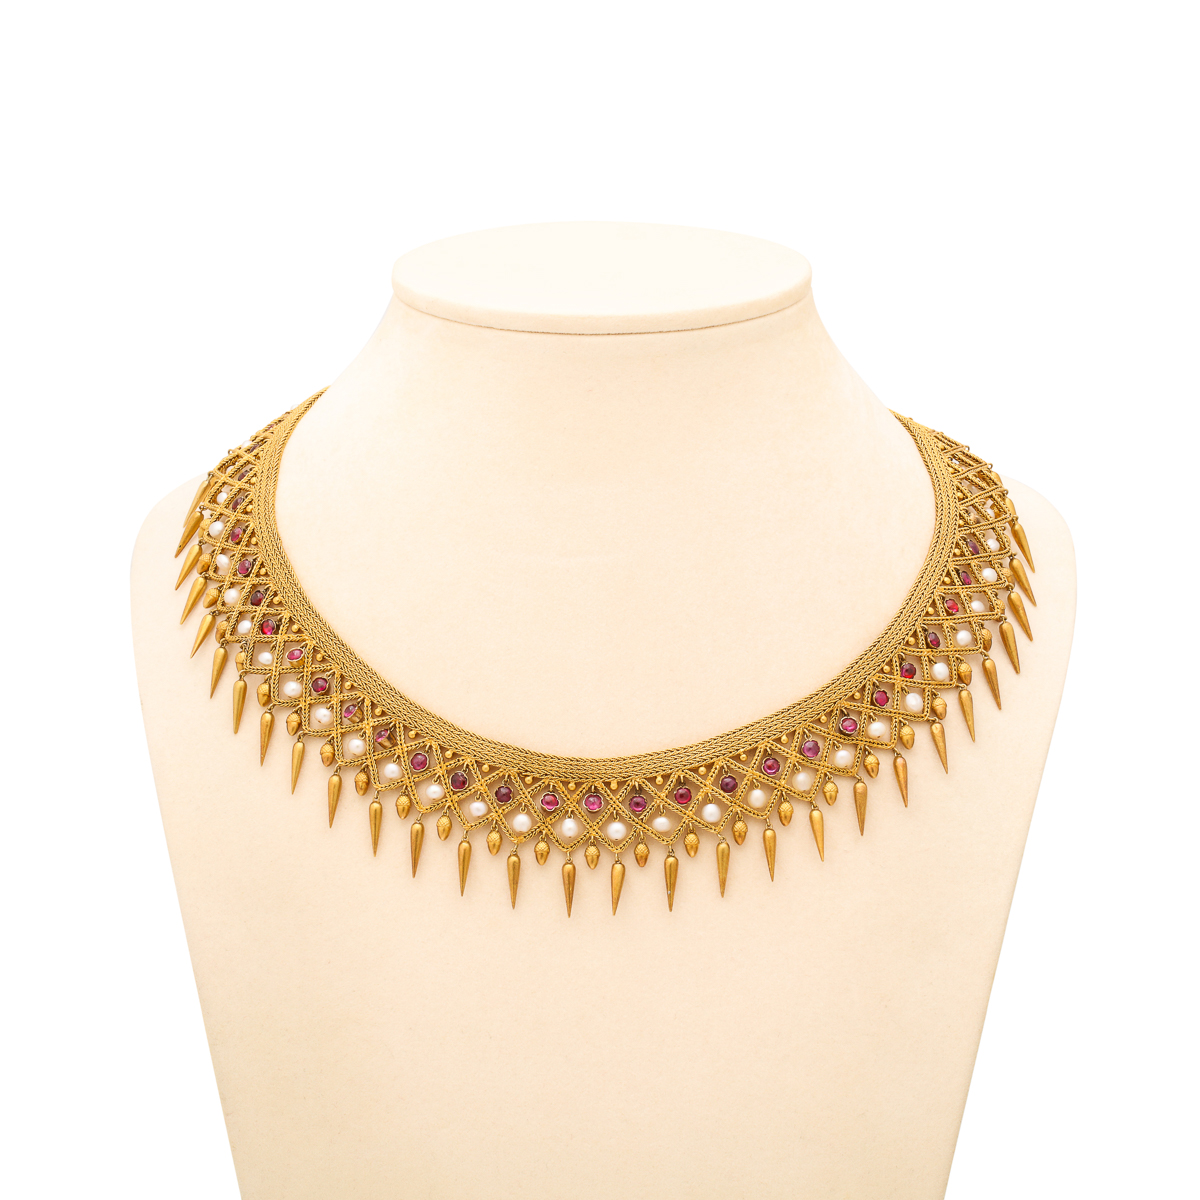 front view of gold fringe necklace set with rubies and natural pearls, pictured on beige neck block